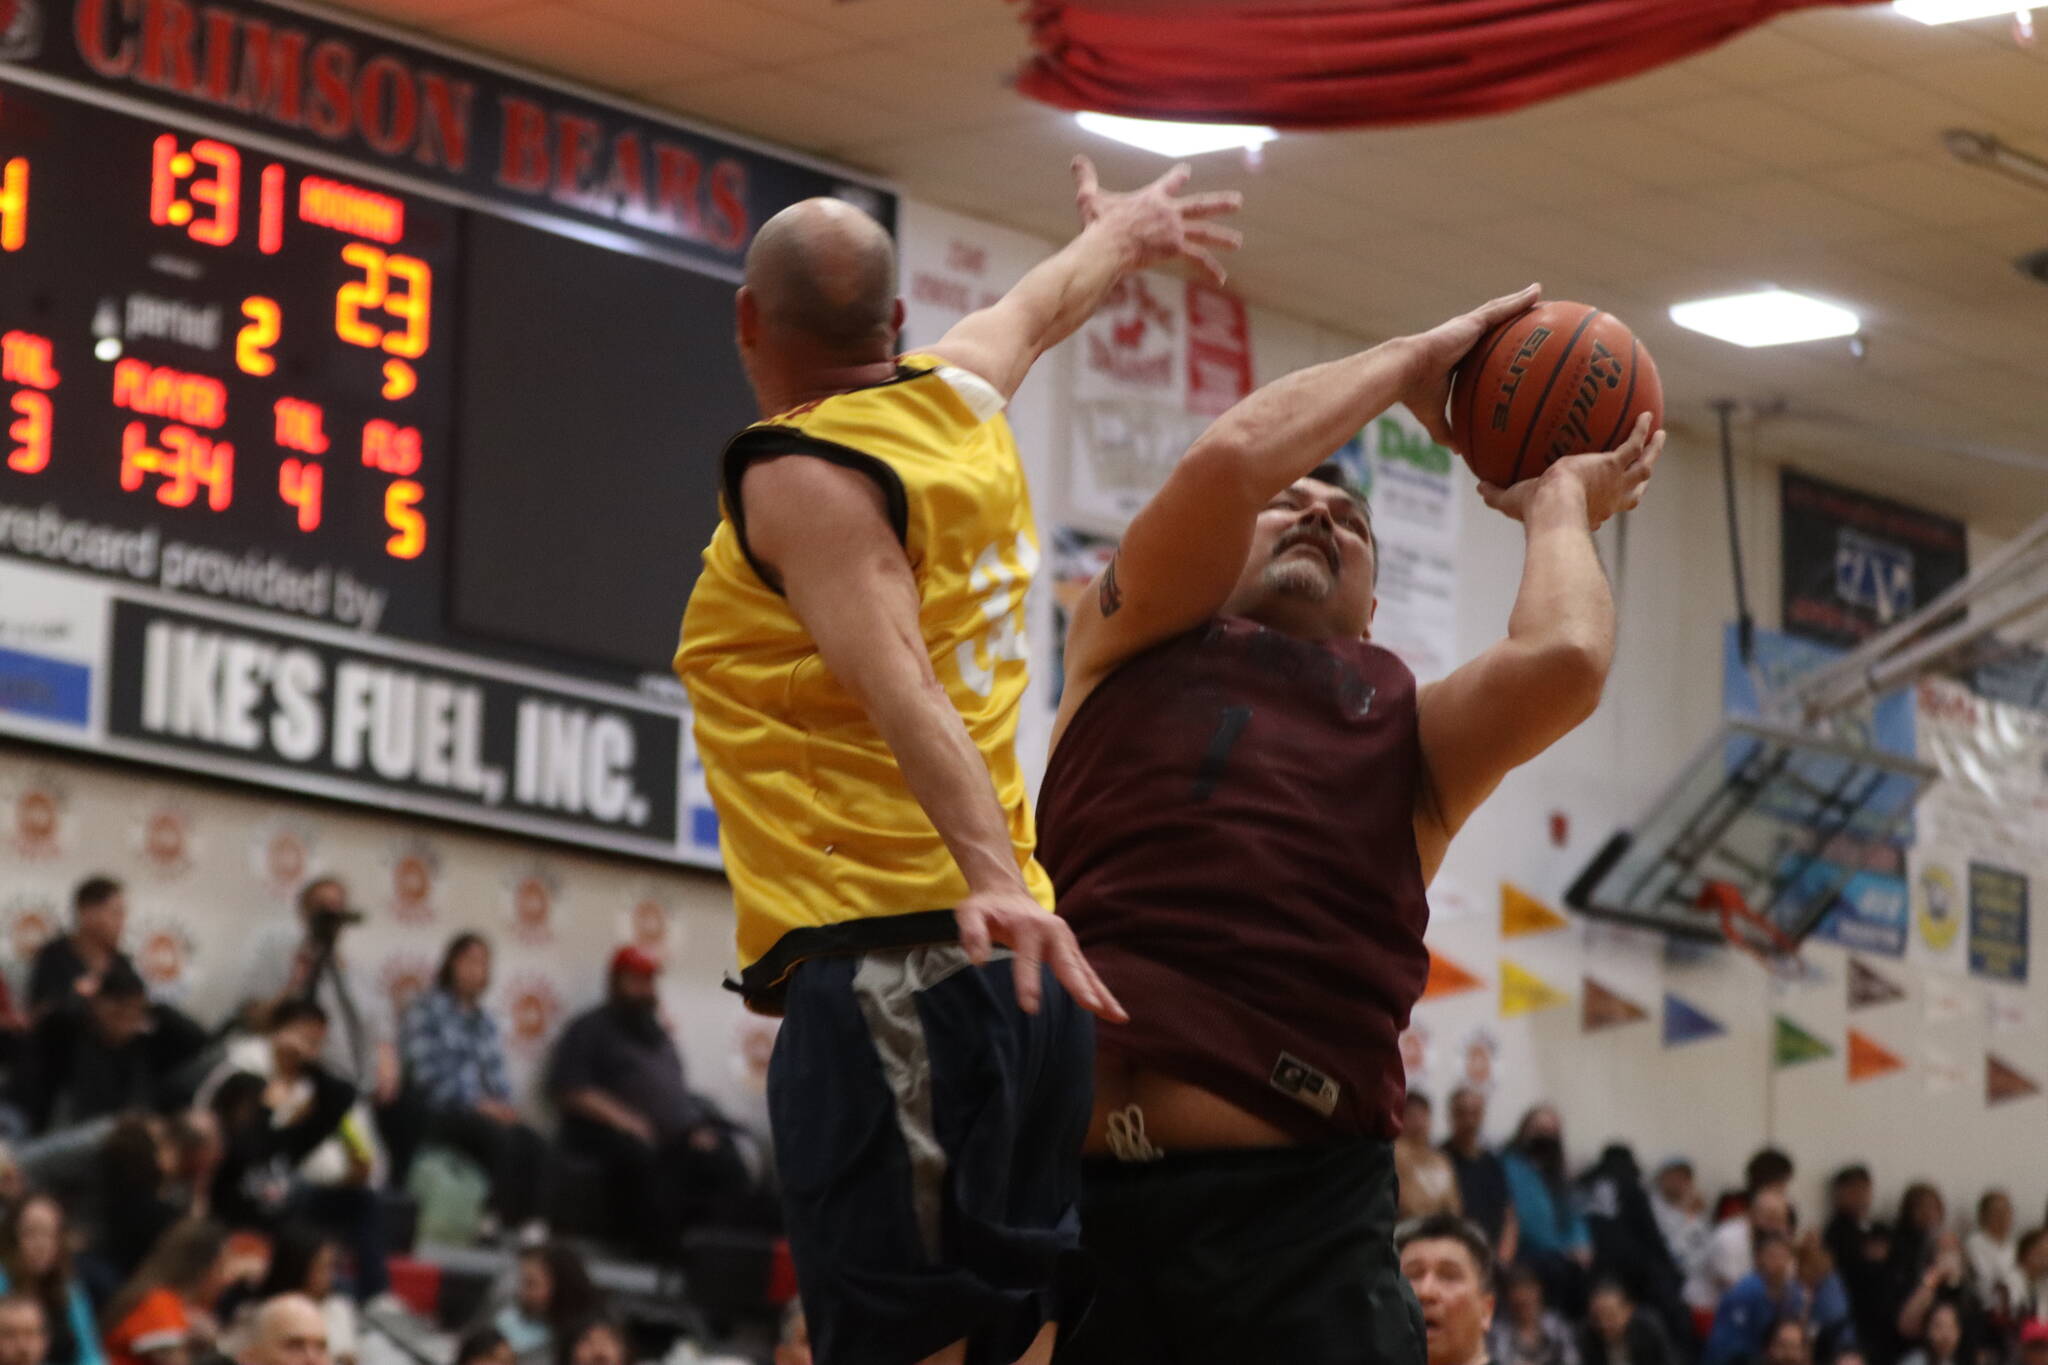 Hoonah’s Michael Mills (1) fights for the rebound against Juneau on Saturday during the championship M bracket game for the 2023 Gold Medal Basketball Tournament. Mills finished the game with 8 points